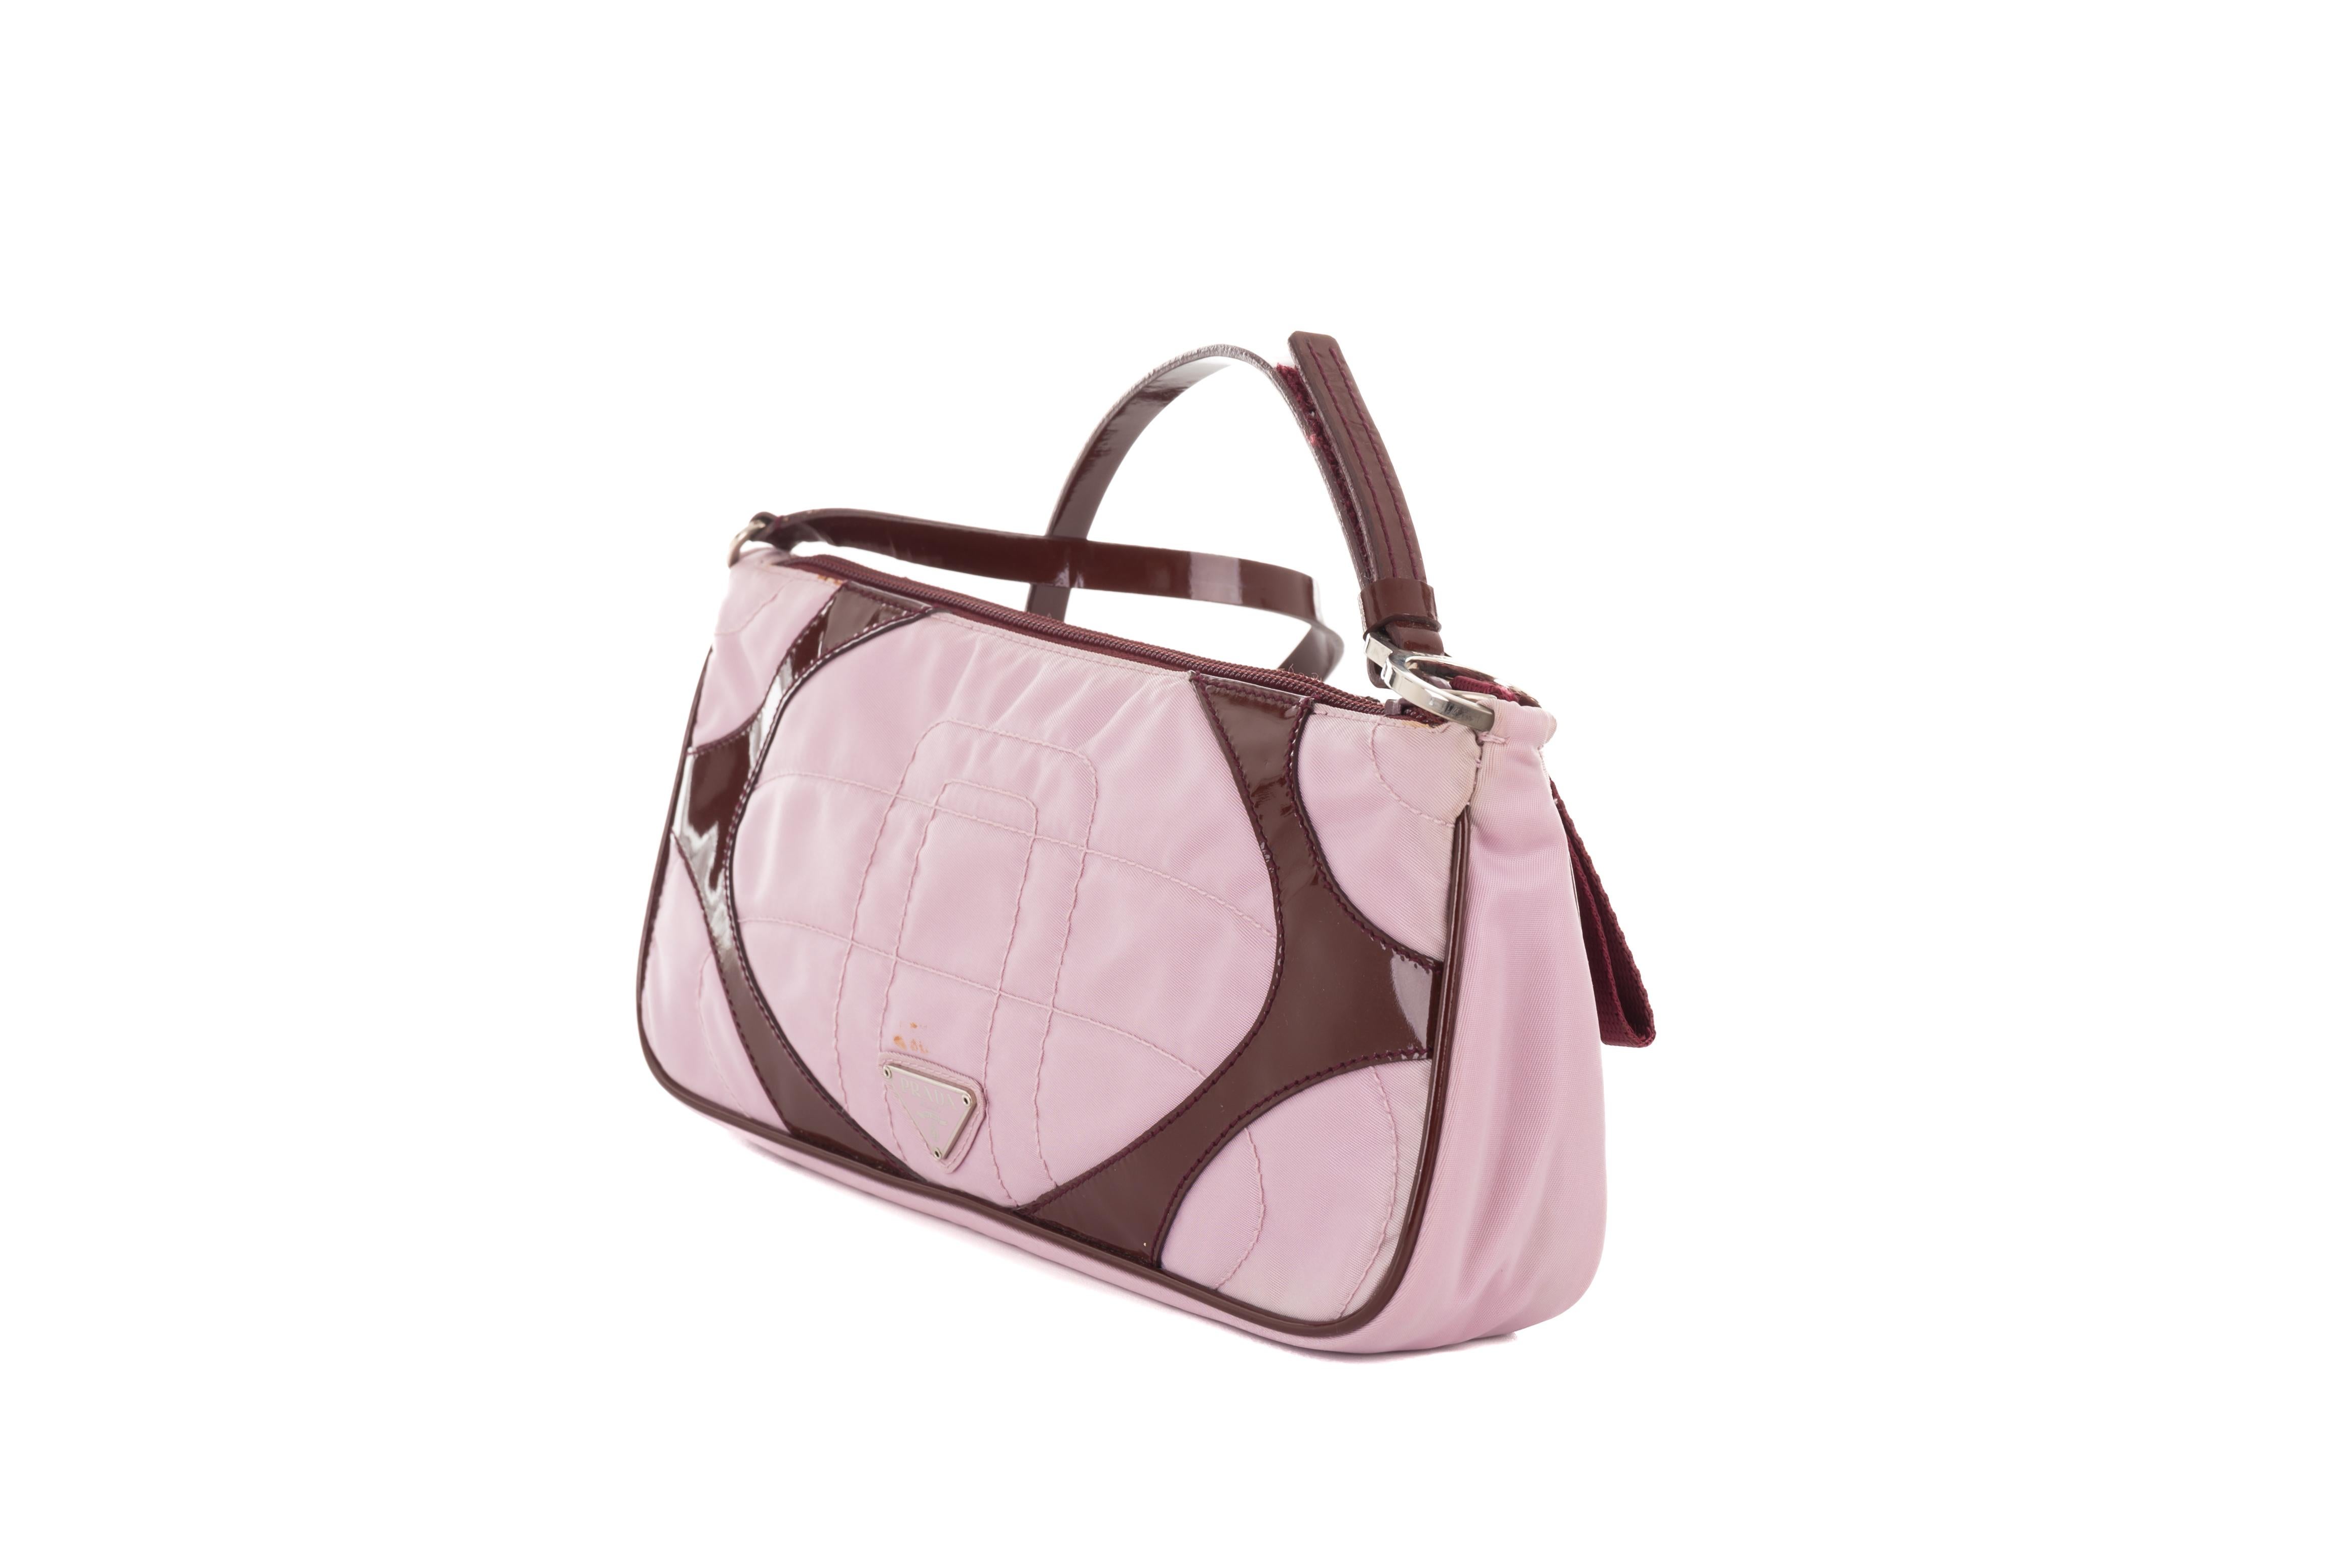 - Prada by Miuccia Prada
- Spring-summer 2000 collection
- Sold by Gold Palms Vintage
- Pink nylon quilted mini bag
- Burgundy patent leather detailing and strap 
- Front pink logo
- Small stain on the front (reflected on price)